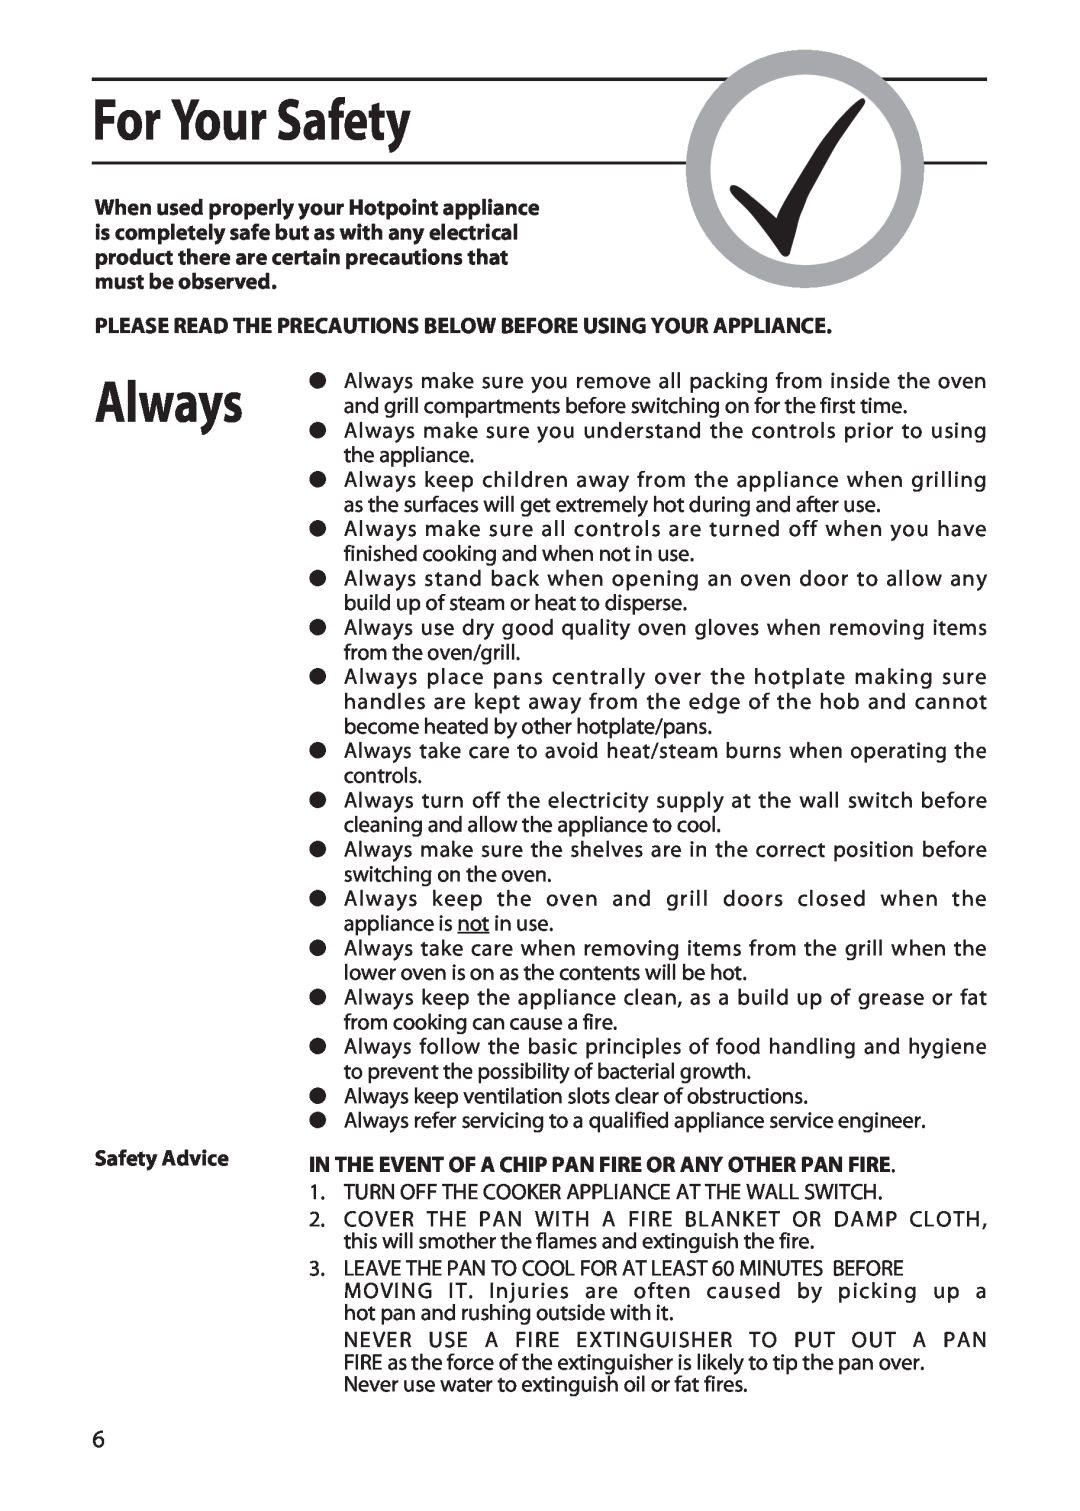 Hotpoint EW51 manual For Your Safety, Always, Please Read The Precautions Below Before Using Your Appliance, Safety Advice 